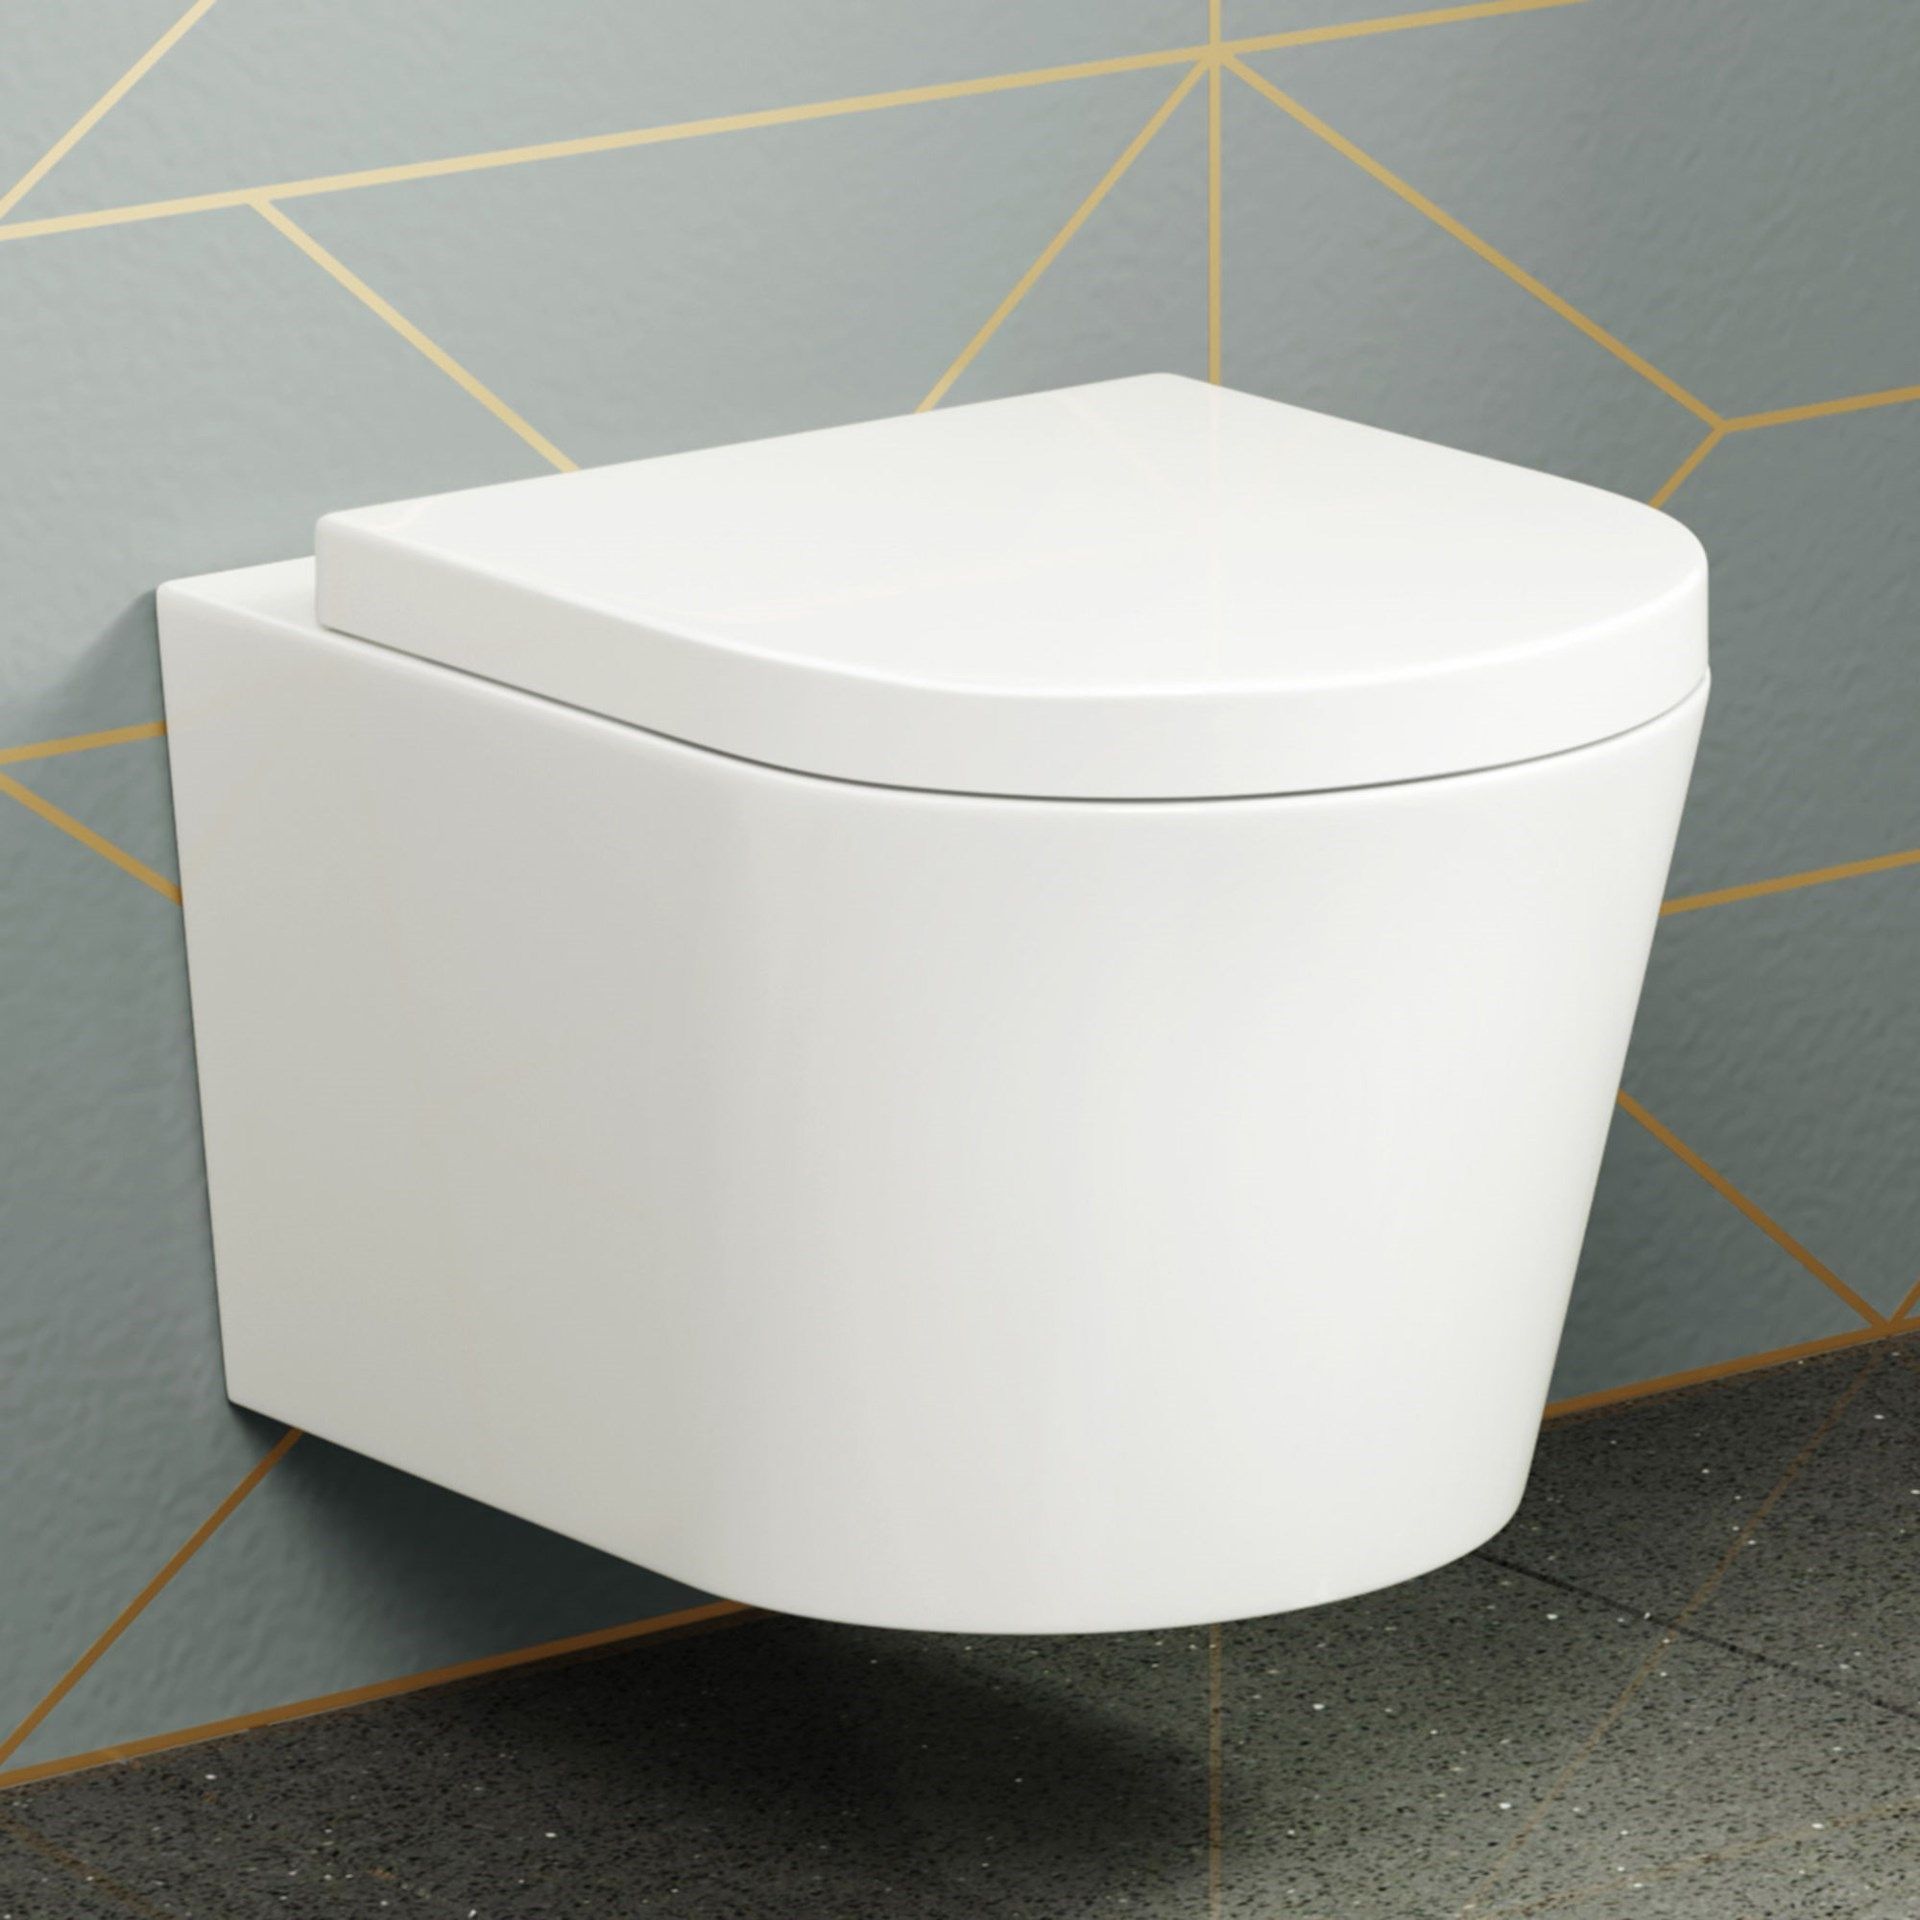 New & Boxed Lyon II Wall Hung Toilet inc Luxury Soft Close Seat. RRP £349.99.We love this beca... - Image 3 of 3